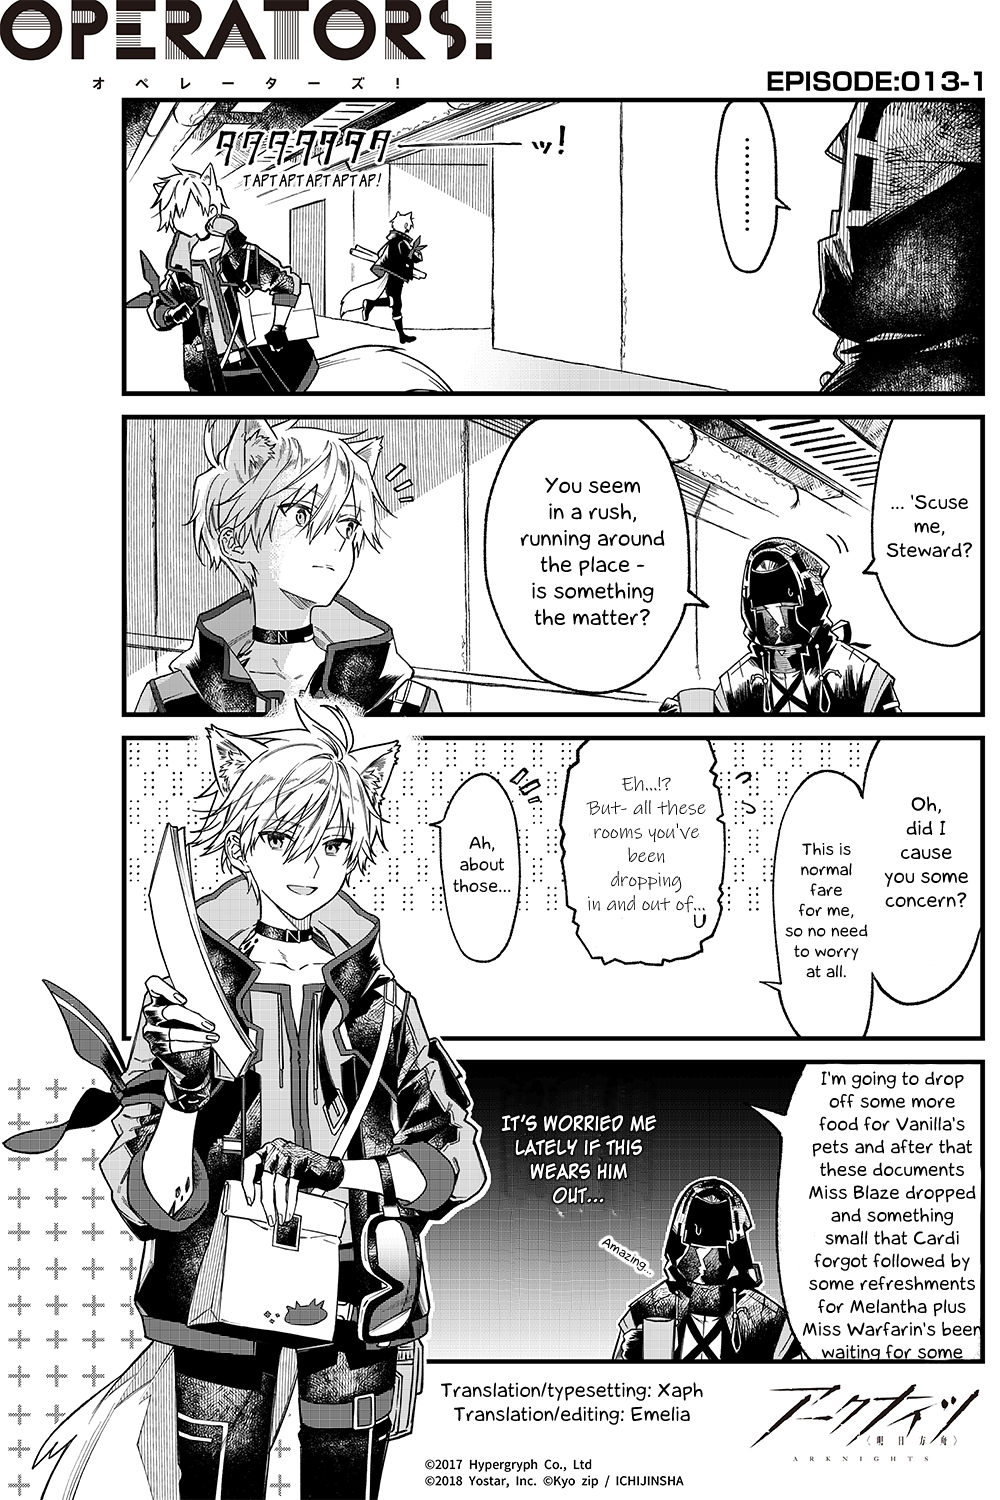 Arknights: OPERATORS! - chapter 13.1 - #1